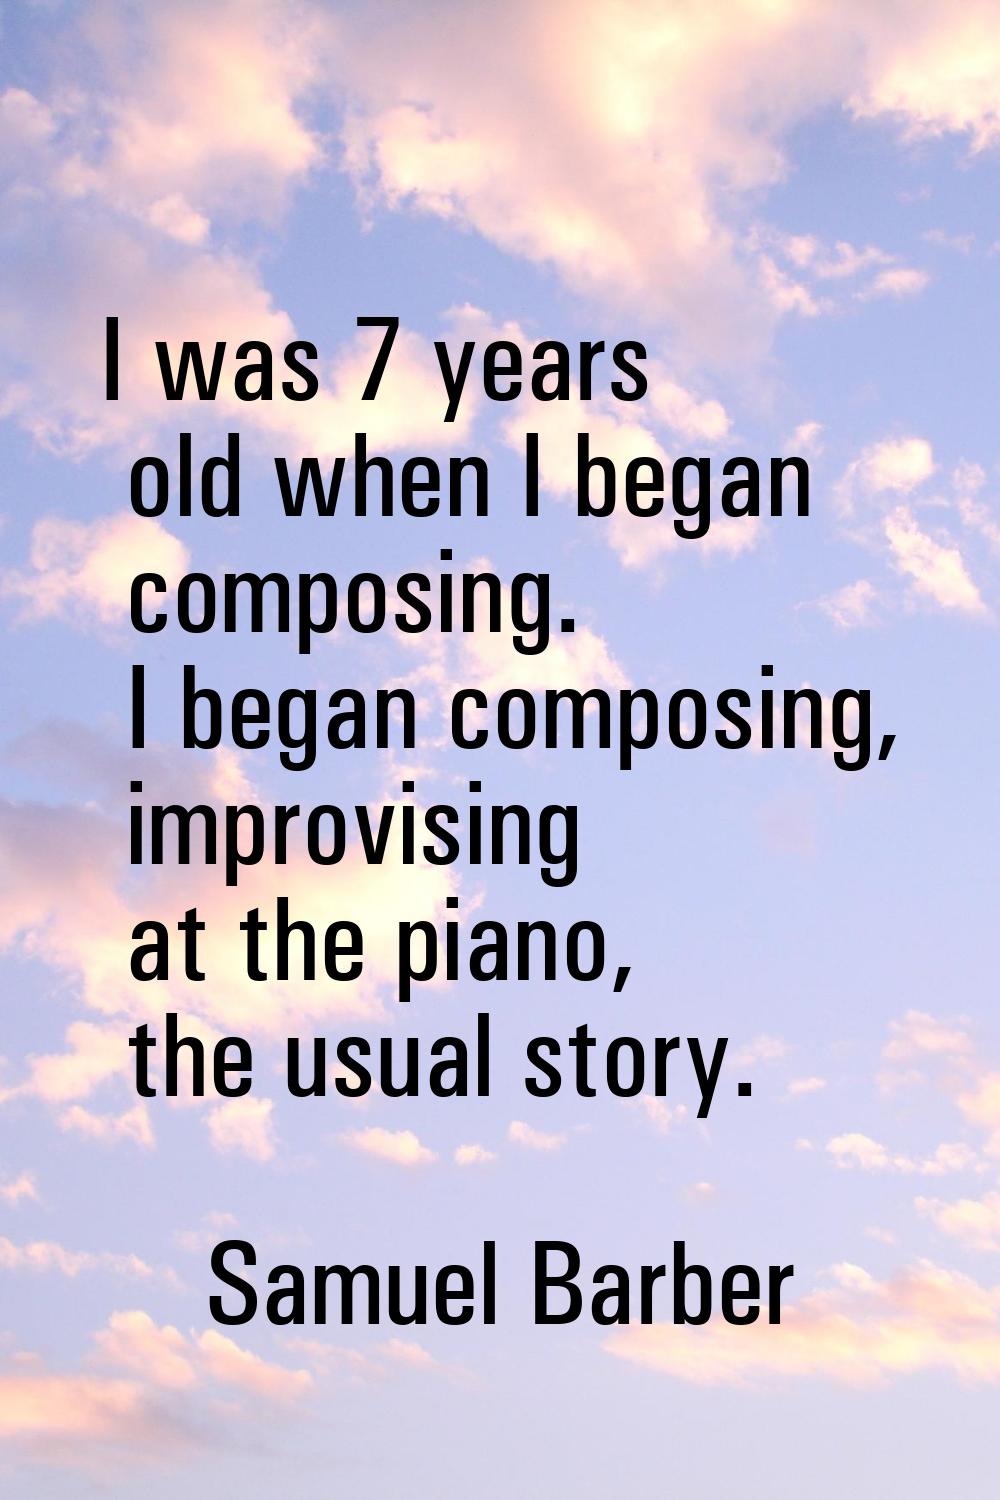 I was 7 years old when I began composing. I began composing, improvising at the piano, the usual st